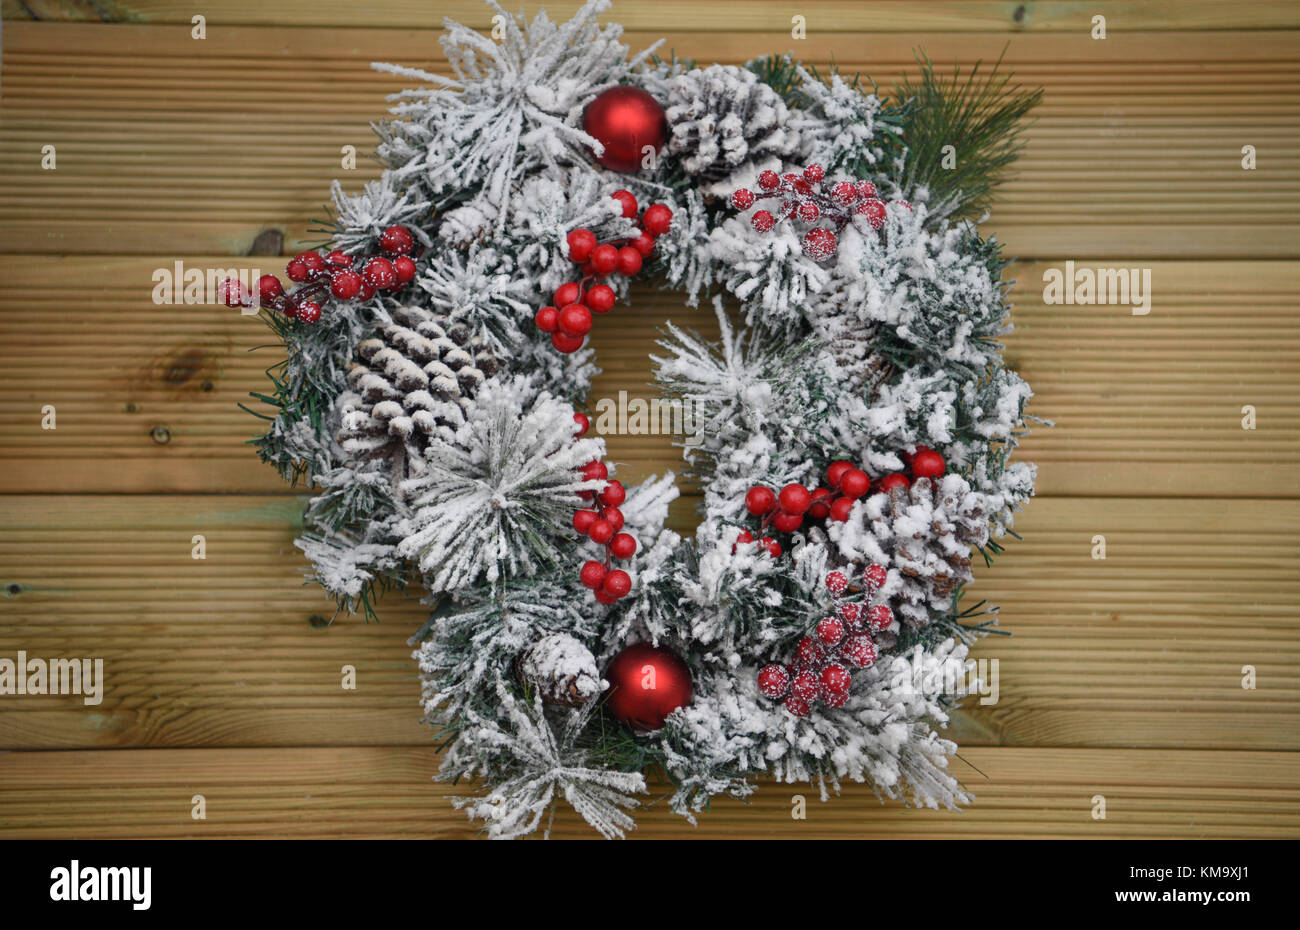 Christmas photography image of a green pine tree wreath covered in snow with red berries and on rustic natural wood background Stock Photo